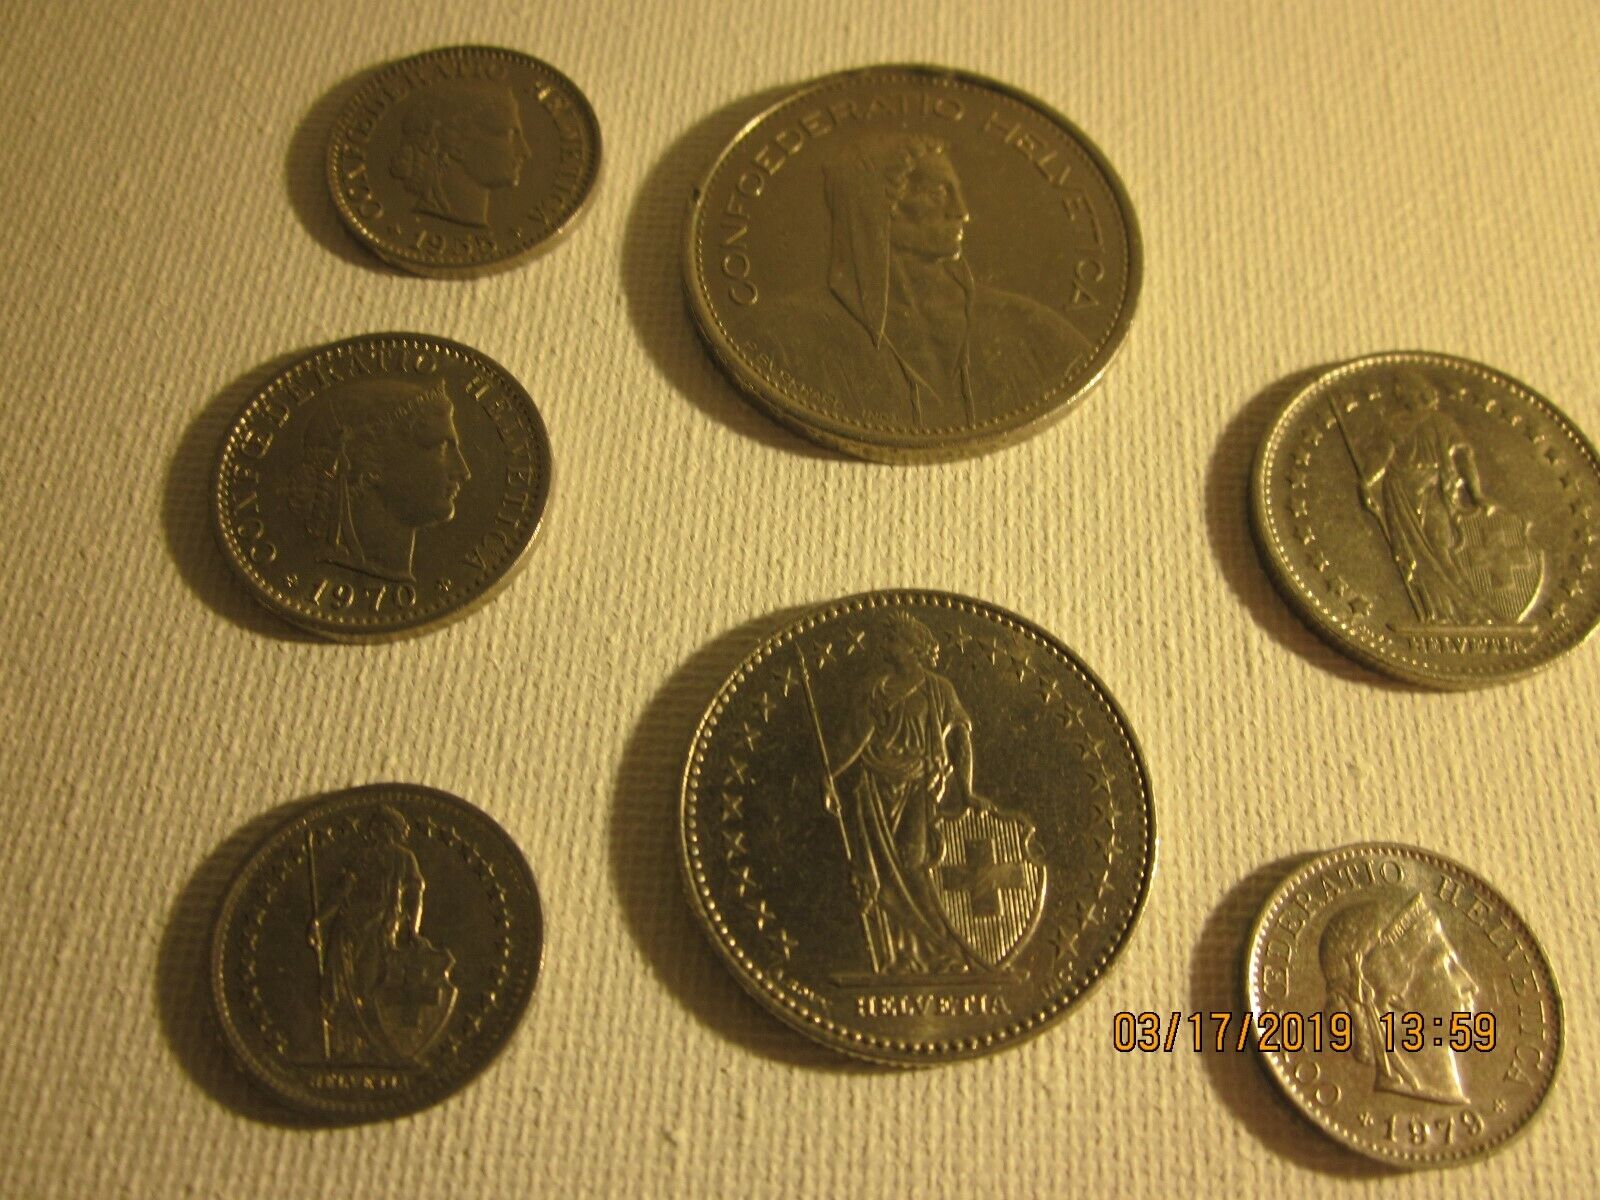  7 Swis Confoederatio Helvetica  coins ranging in date & Franc .  Great shape! Без бренда - фотография #5